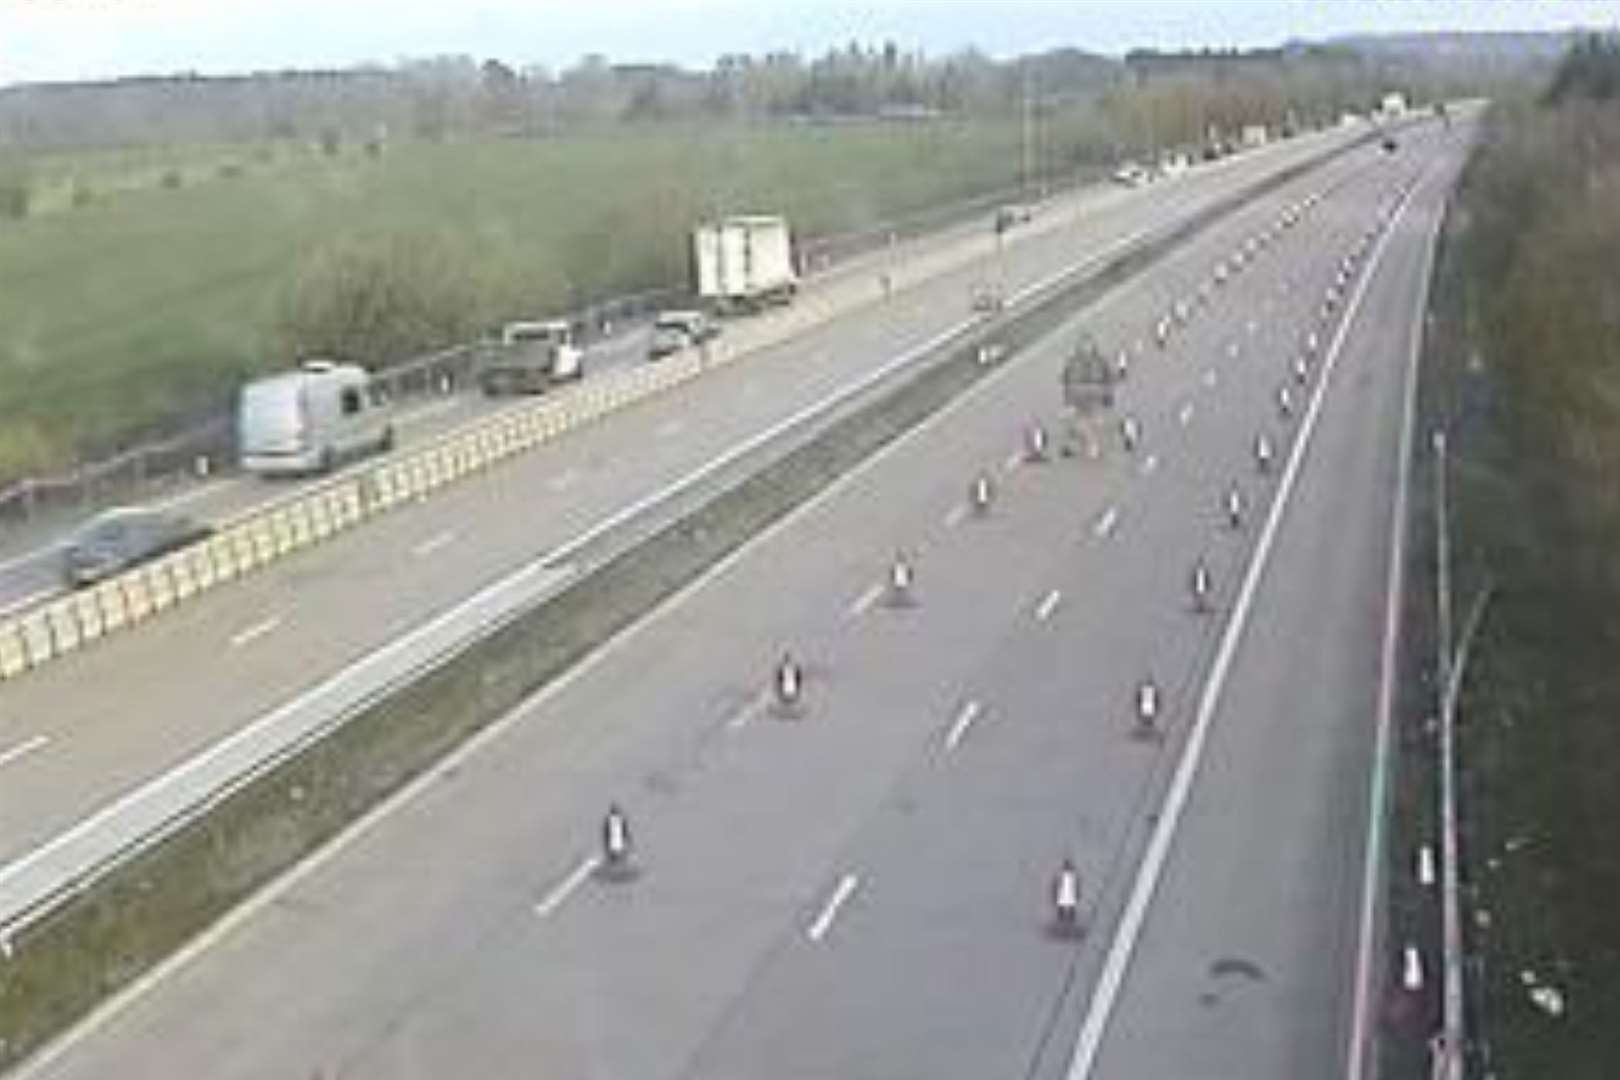 Traffic cameras from this morning show no queuing lorries between Maidstone and Ashford